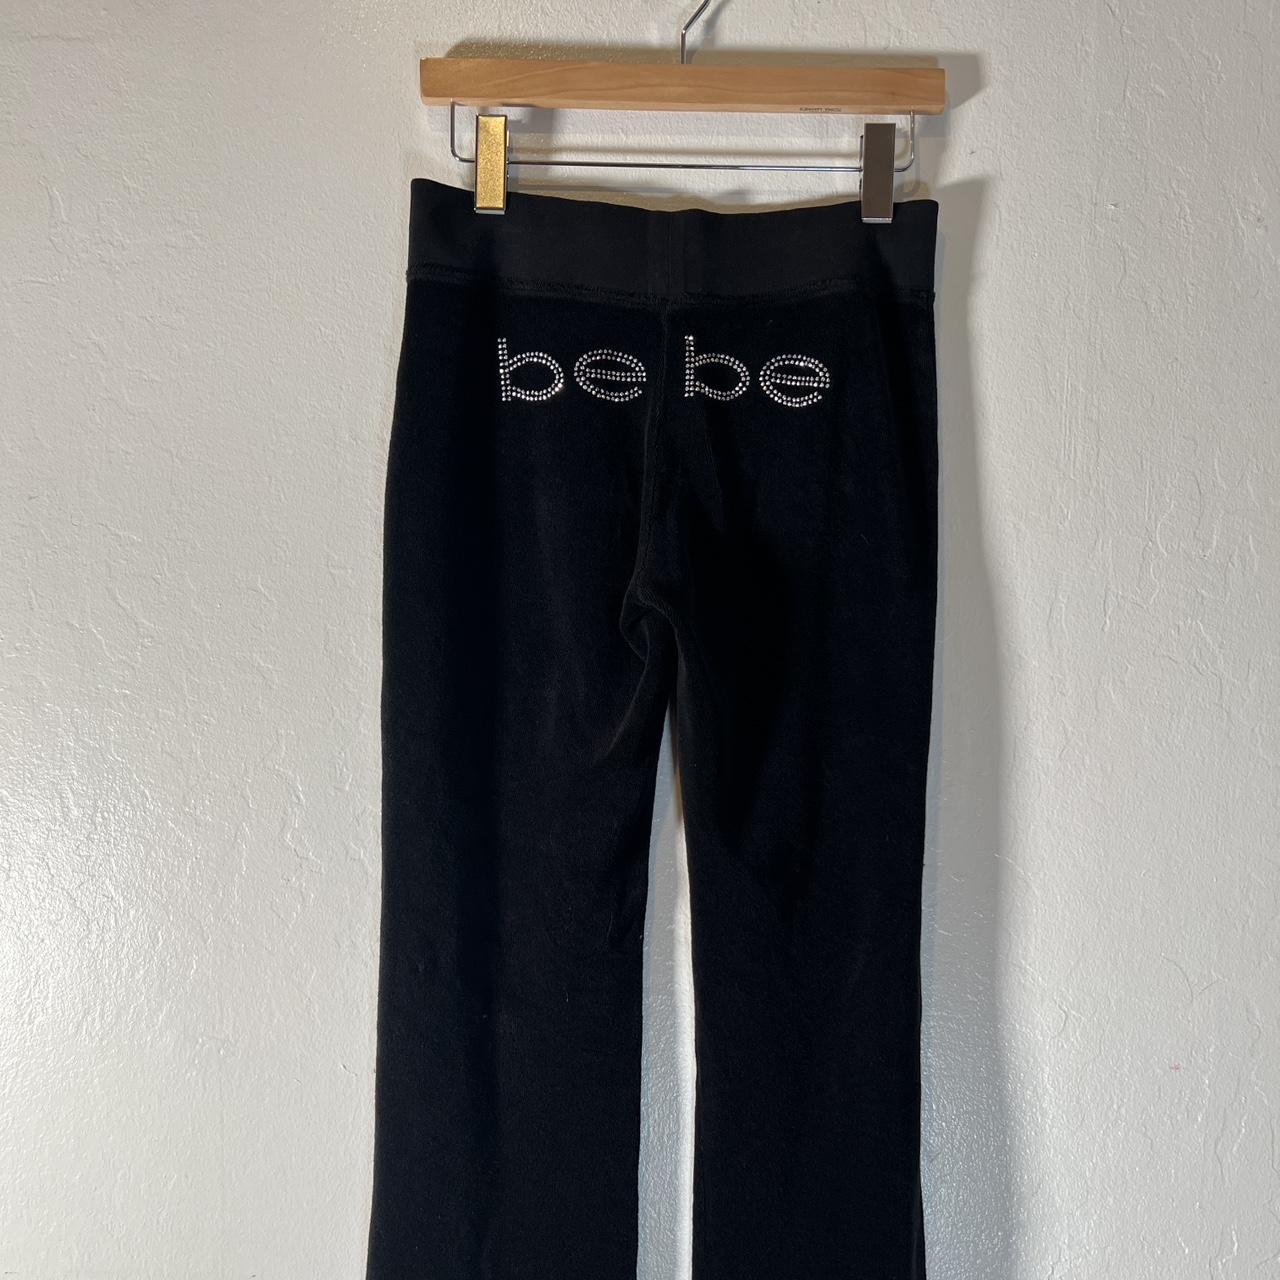 Bebe Women's Black and Silver Joggers-tracksuits